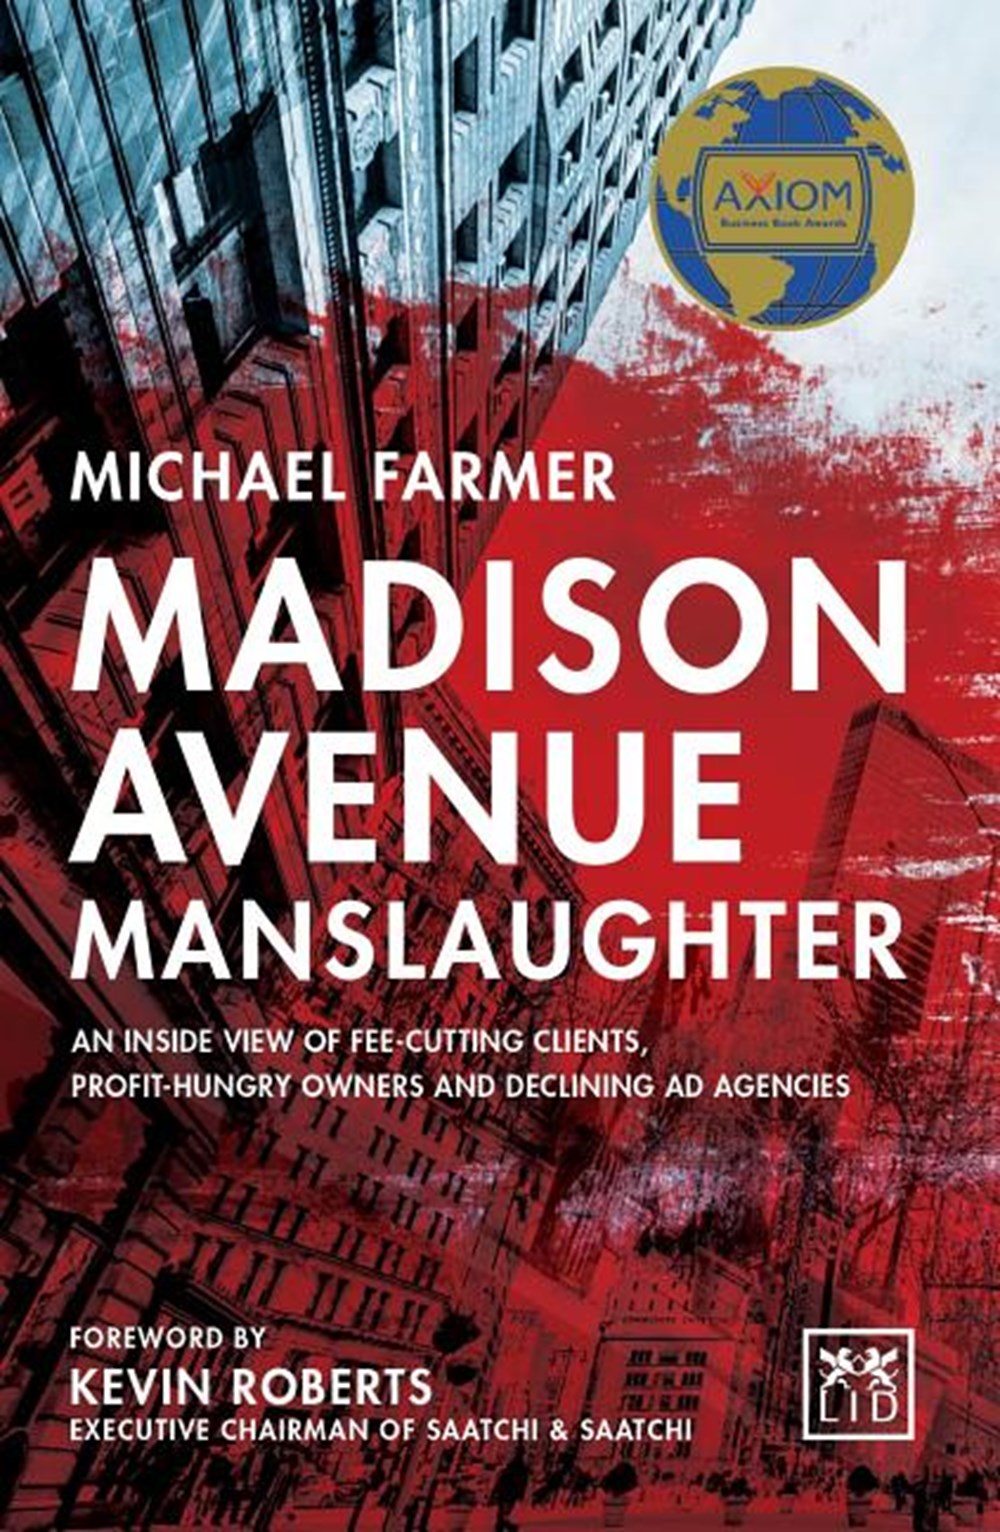 Madison Avenue Manslaughter: An Inside View of Fee-Cutting Clients, Profit-Hungry Owners and Declini